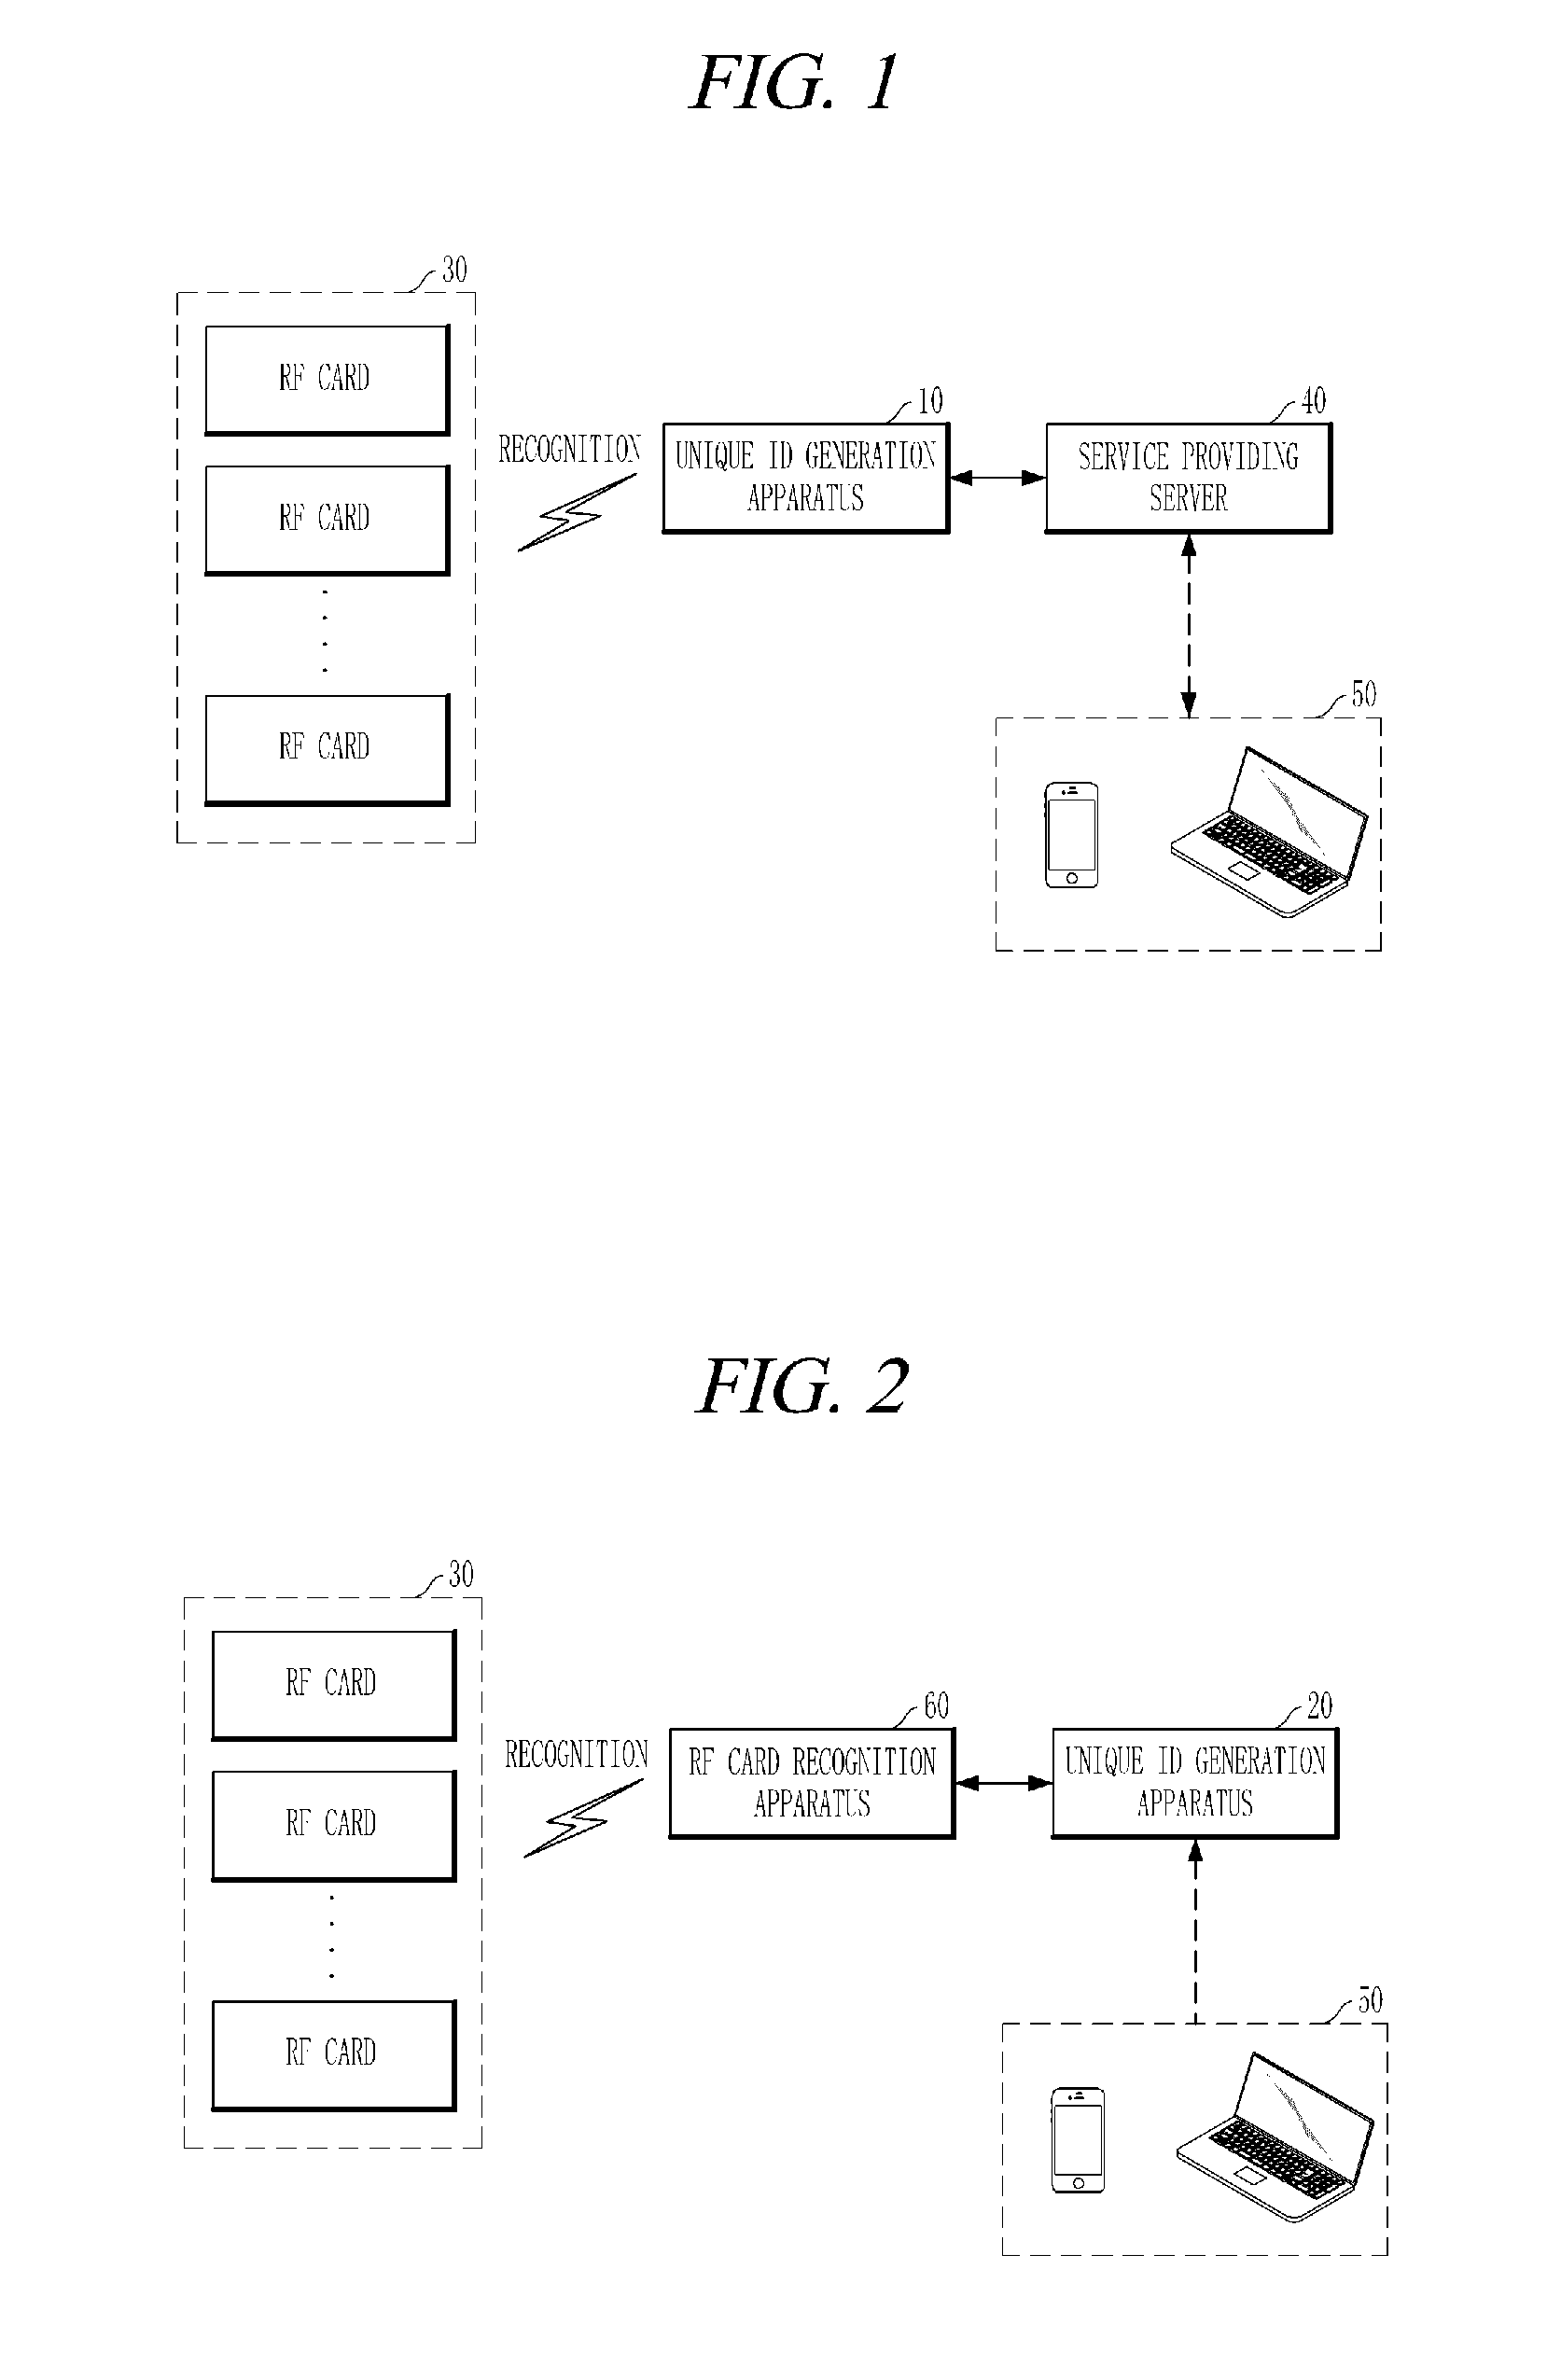 Apparatus and method for generating unique id of RF card